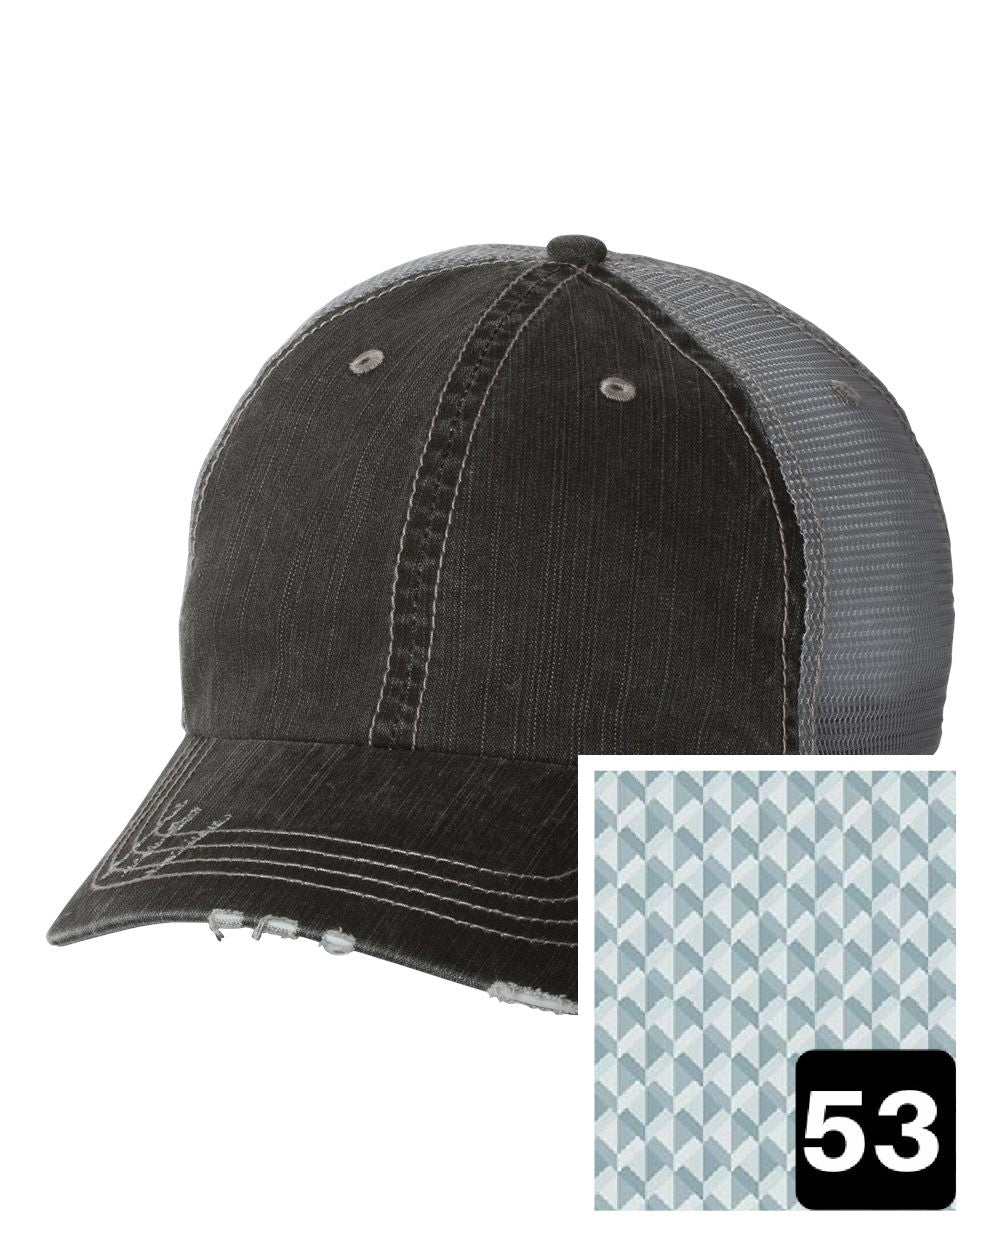 gray distressed trucker hat with multi-color stripe fabric state of Nevada